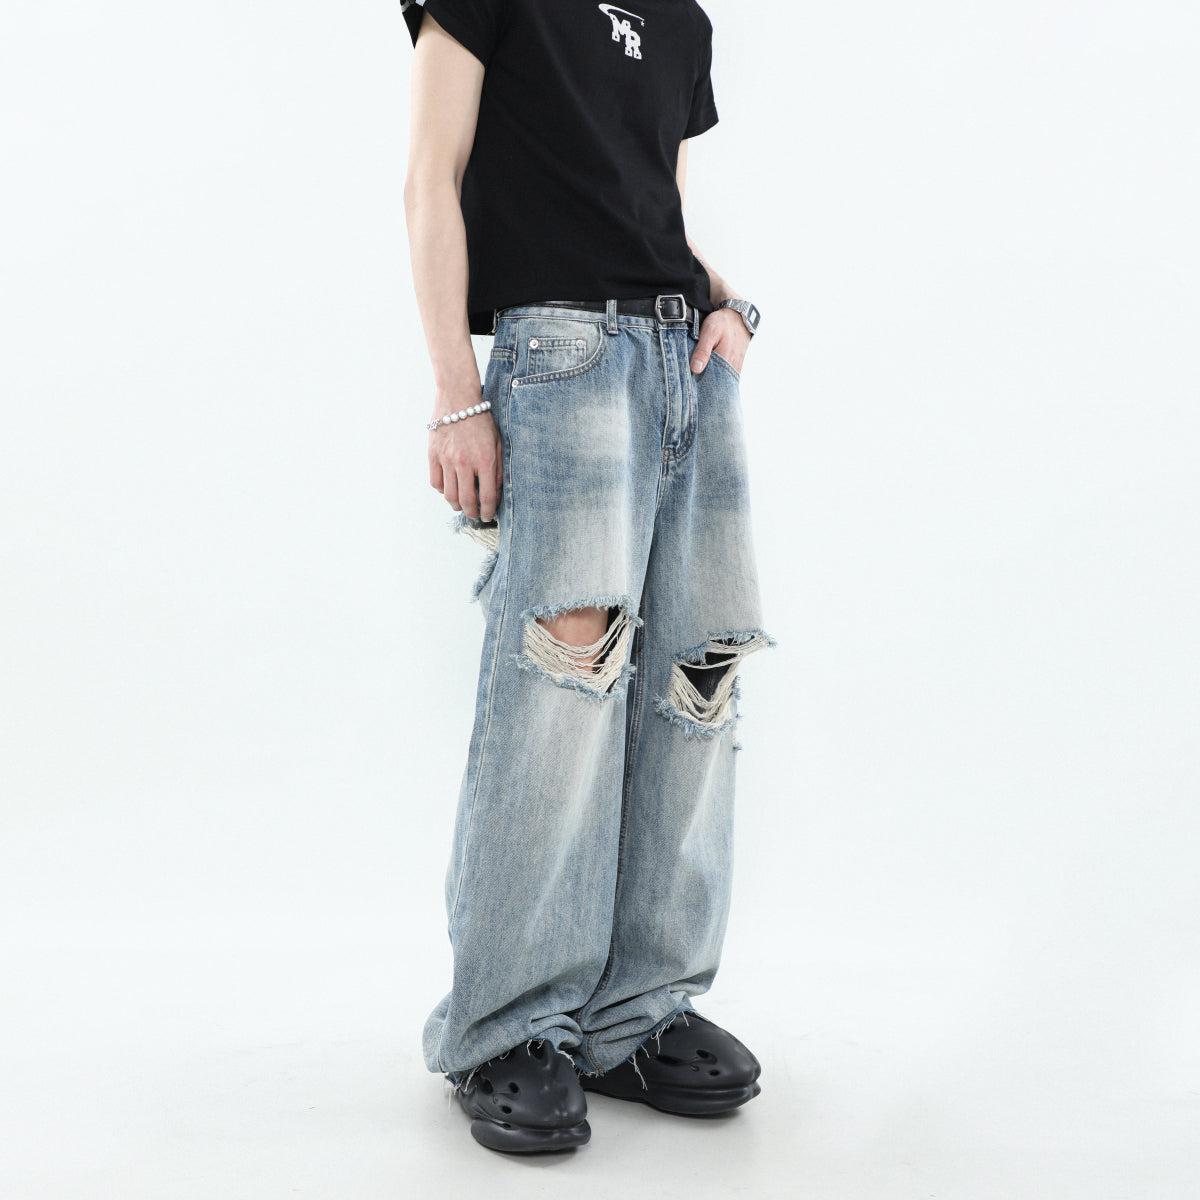 Washed Ripped Hole Jeans Korean Street Fashion Jeans By Mr Nearly Shop Online at OH Vault